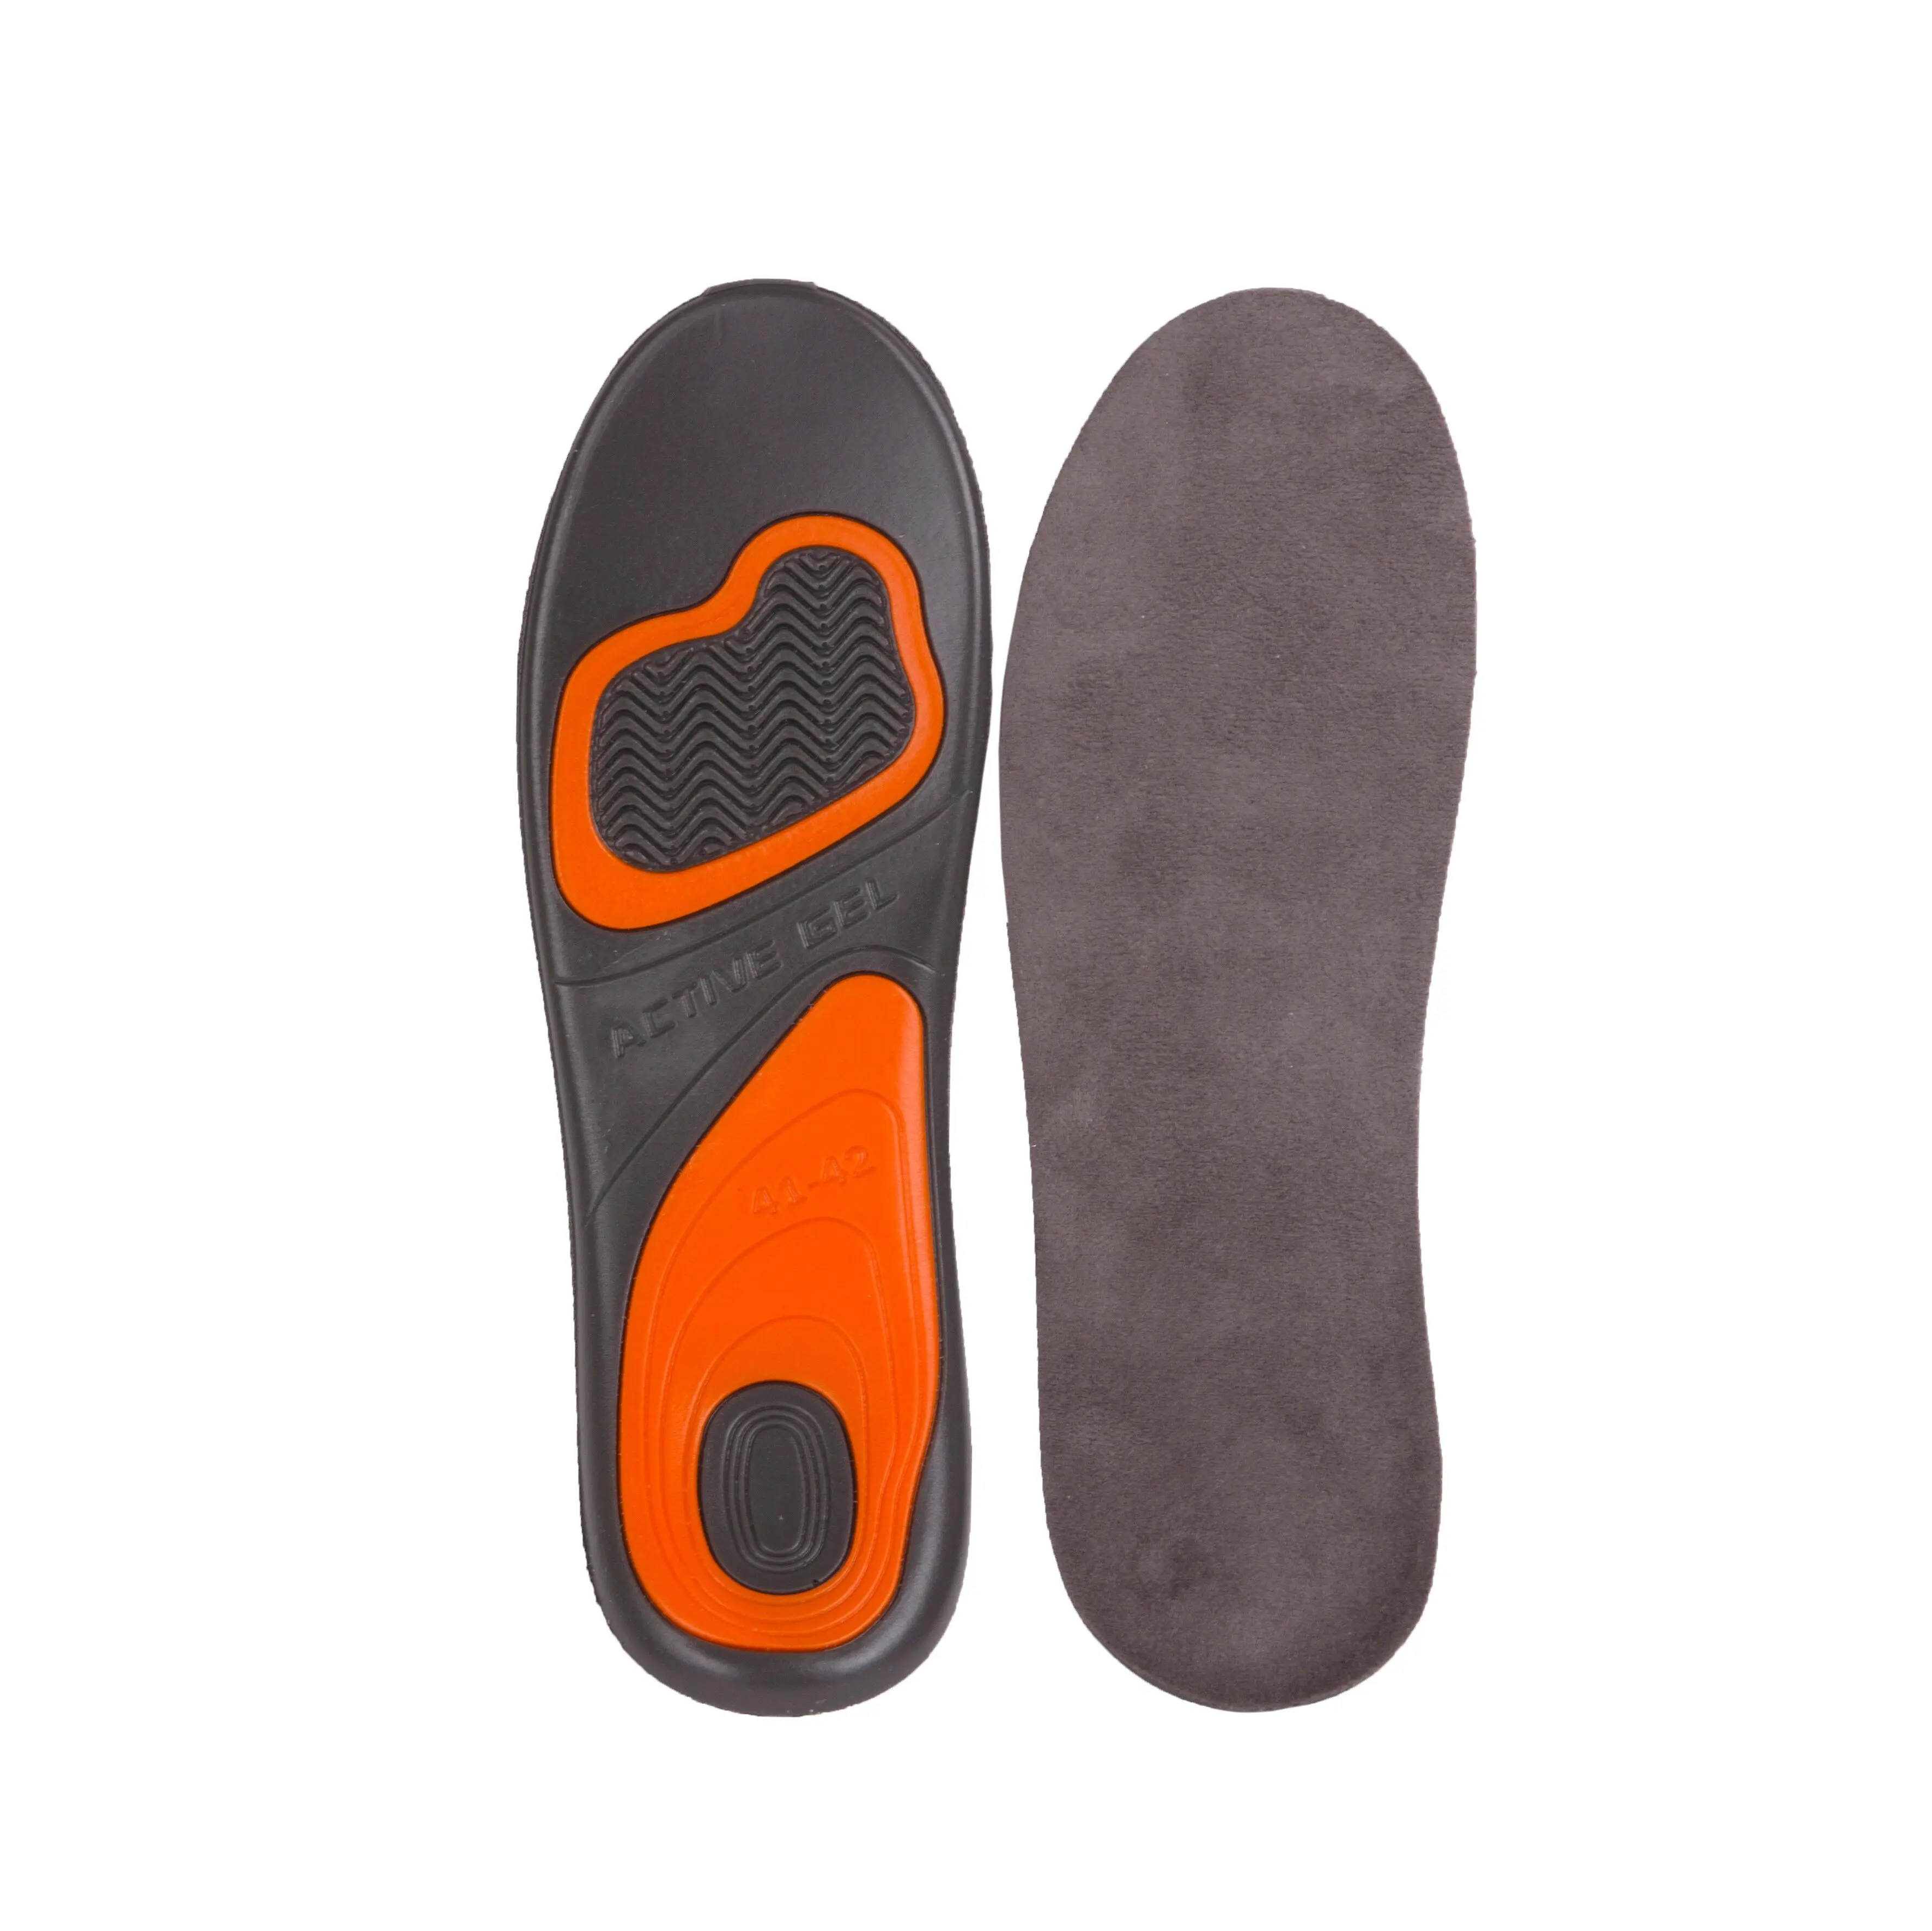 ACTIVE SPORT 3D INSOLE FOR SHOES - 36-46 SIZES